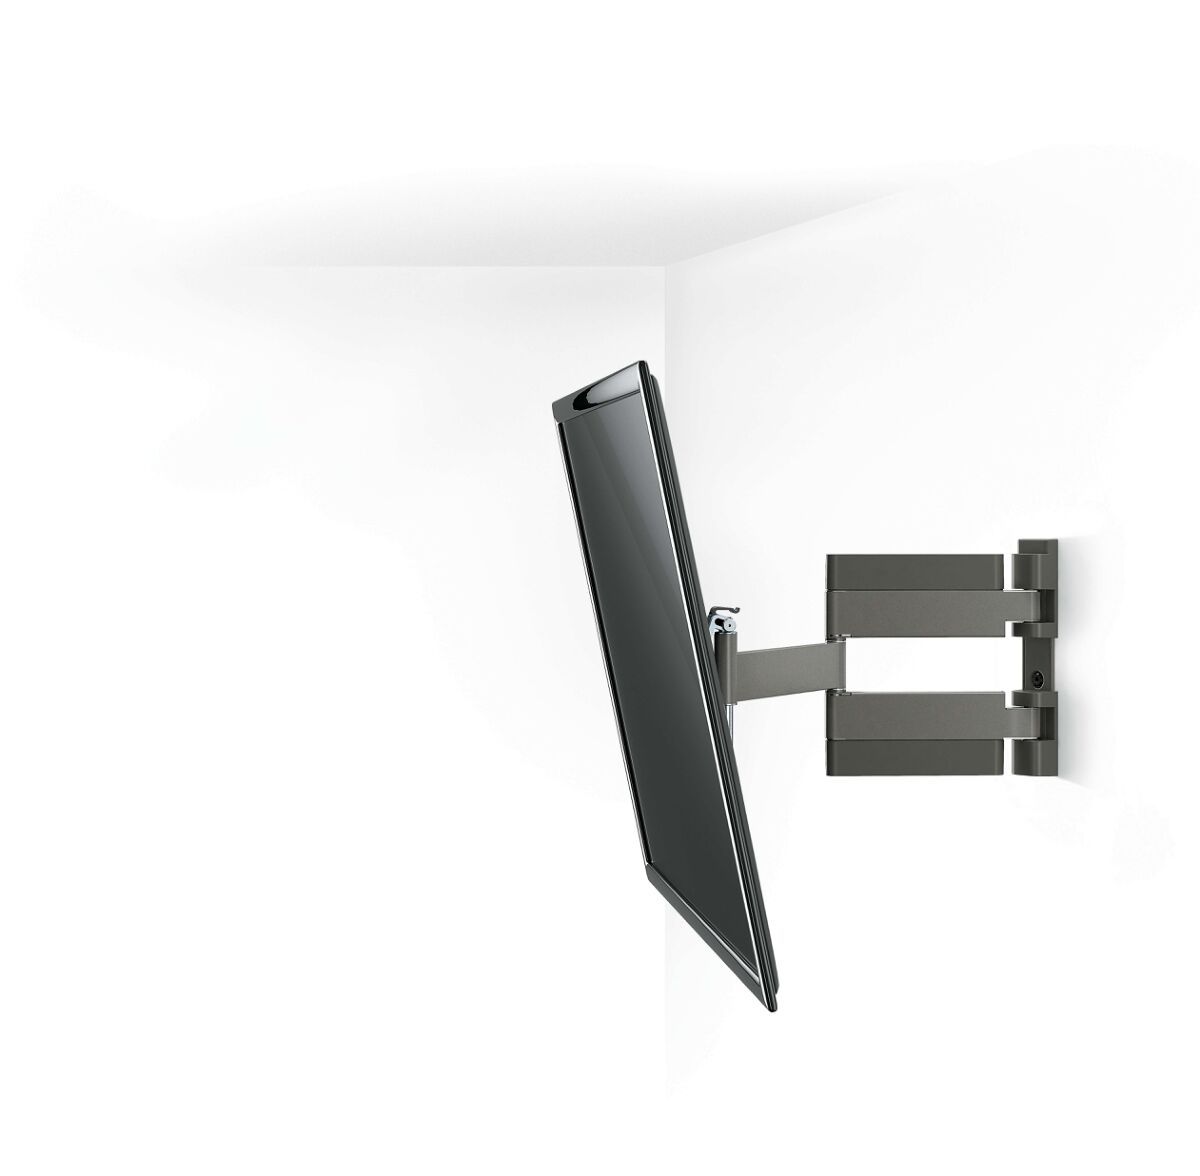 Vogel's THIN 245 UltraThin Full-Motion TV Wall Mount (black) - Suitable for 26 up to 55 inch TVs - Full motion (up to 180°) - Tilt up to 20° - White wall